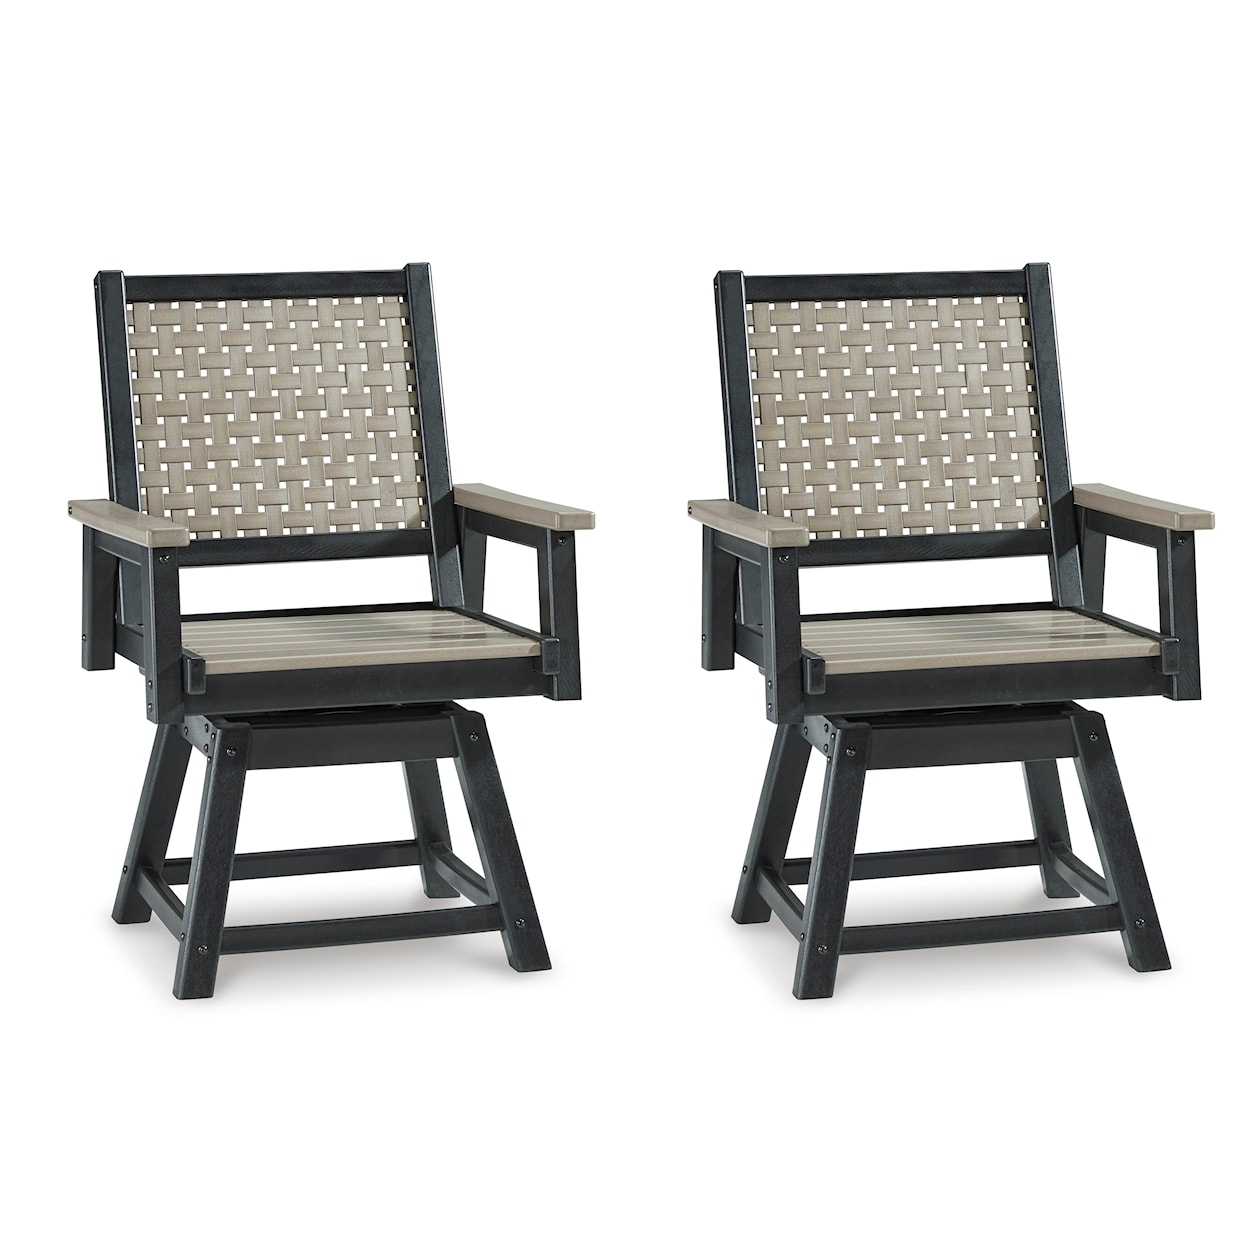 Signature Design by Ashley Mount Valley Outdoor Swivel Chair (Set of 2)